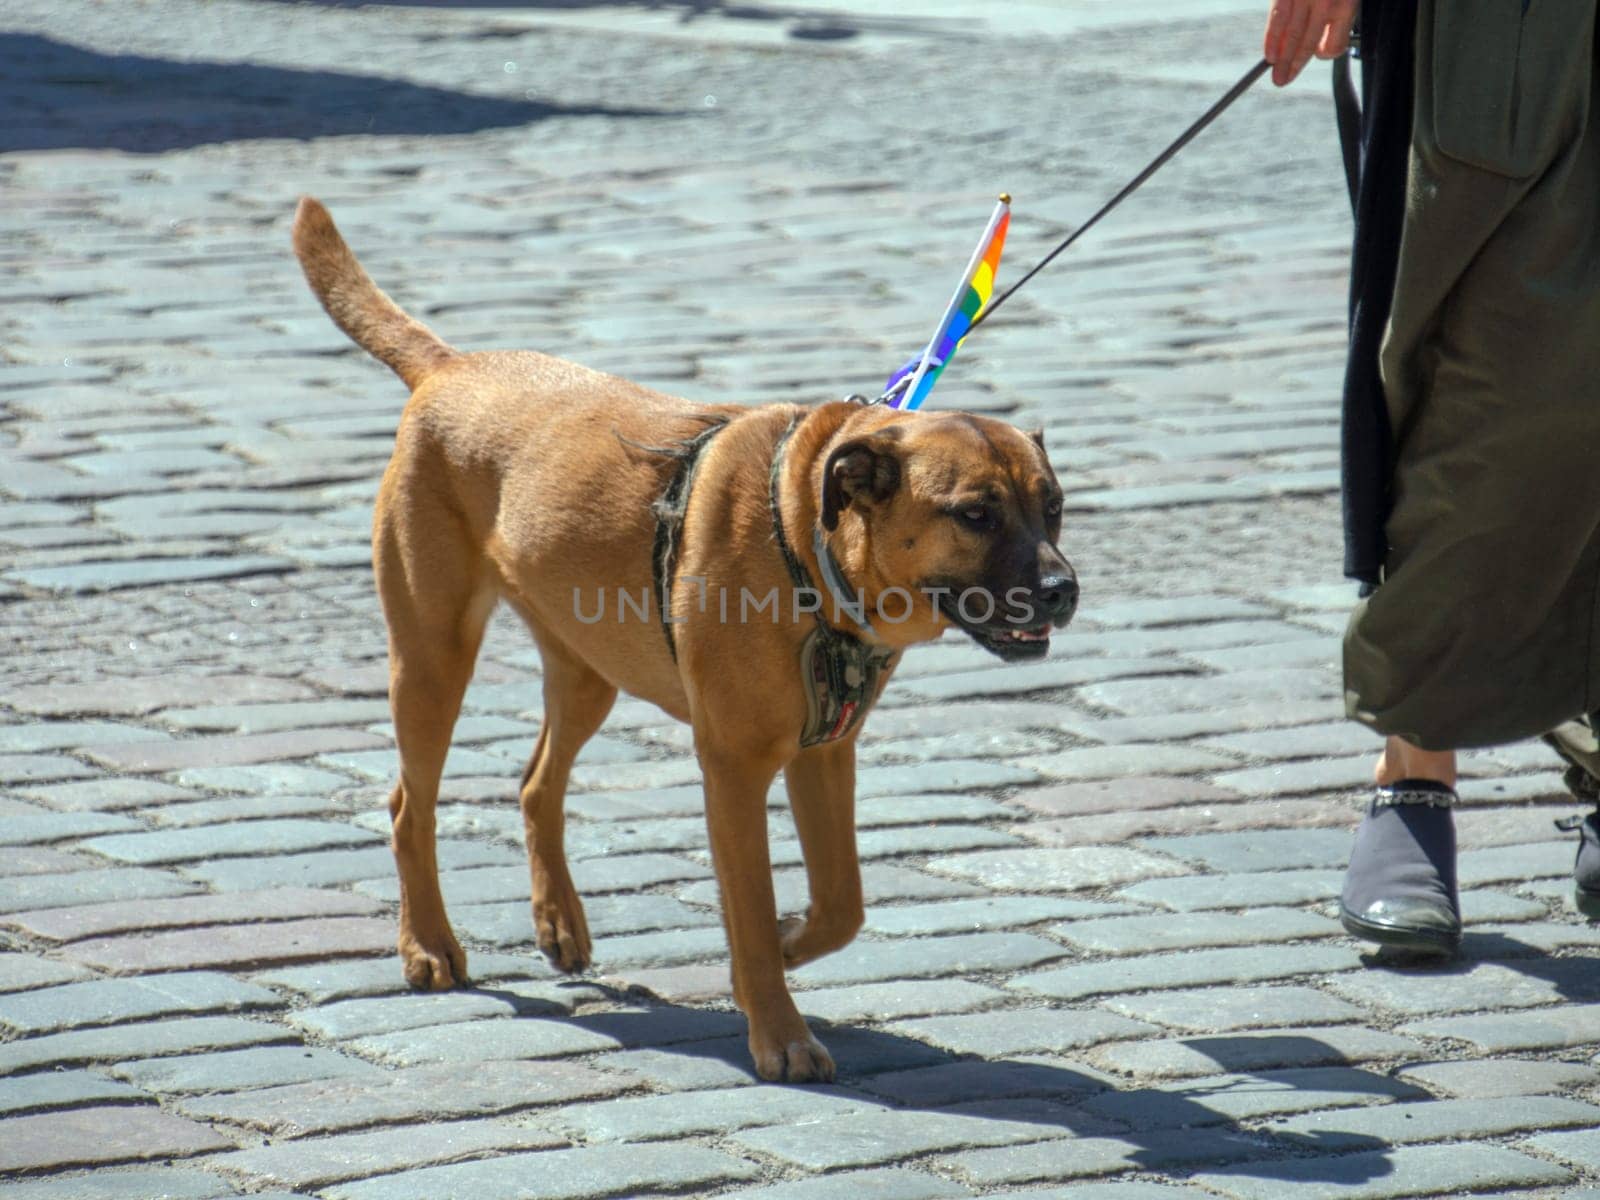 A brown dog takes part in the annual gay parade of the LGBT community with a bright scarf around his neck. gay pride parade of freedom and diversity, happy participants walking. Baltic Pride is an annual LGBT festival